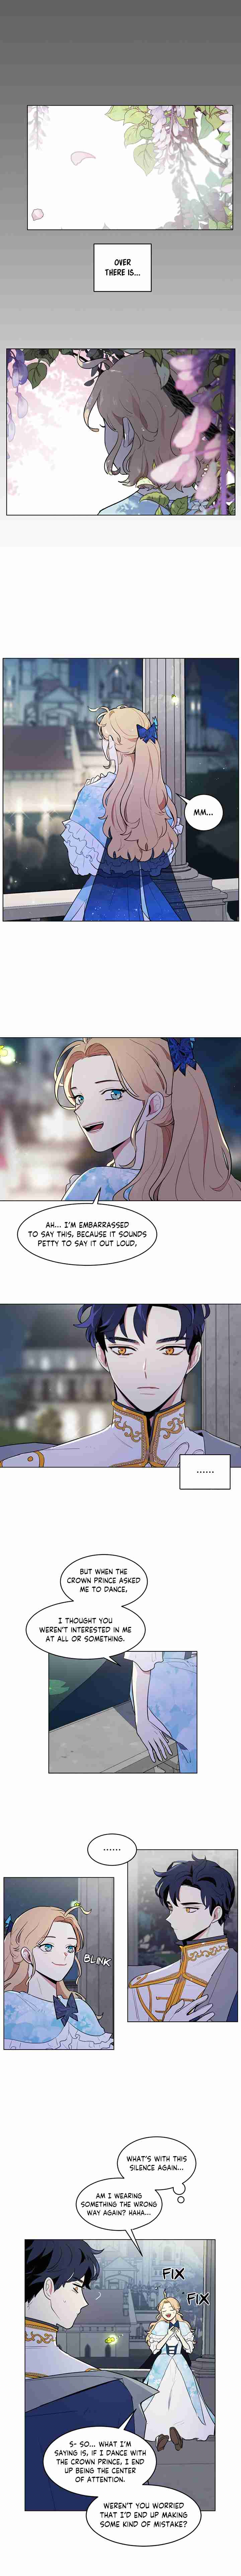 I'm Stanning the Prince Ch. 23